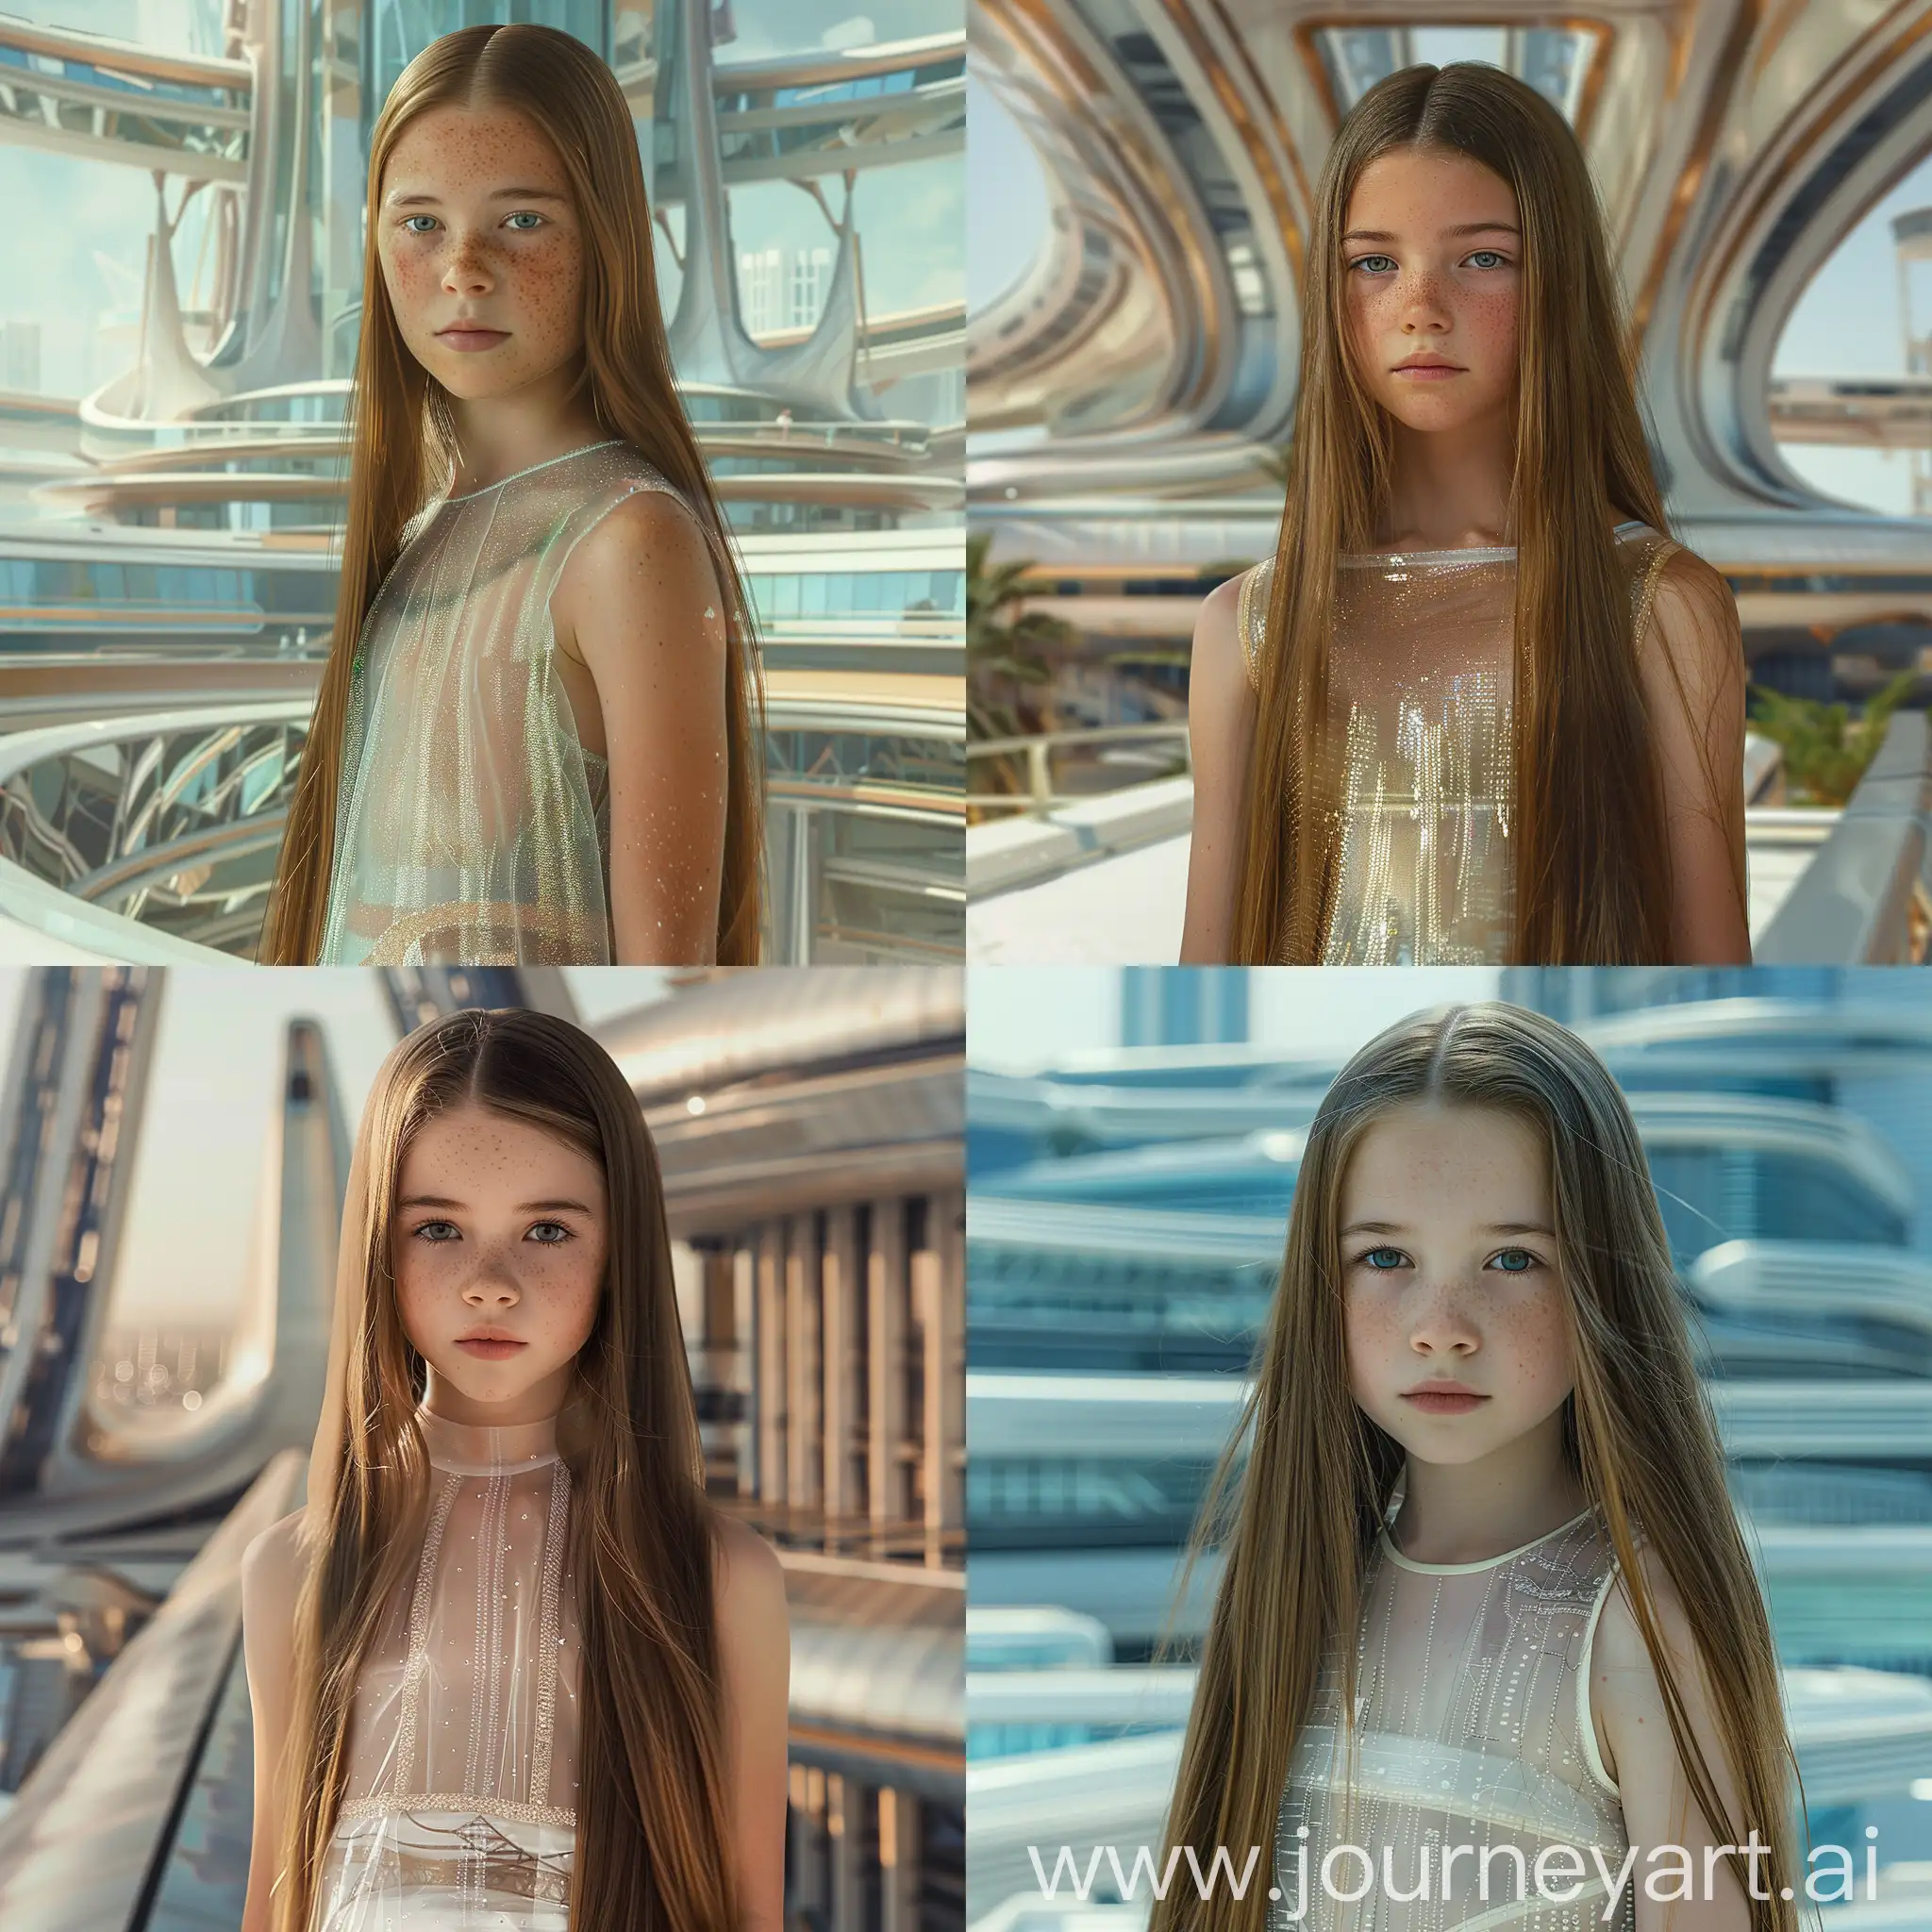 A 13-year-old girl with long straight brown hair, a face without freckles, in a transparent dress against the backdrop of a futuristic school building.